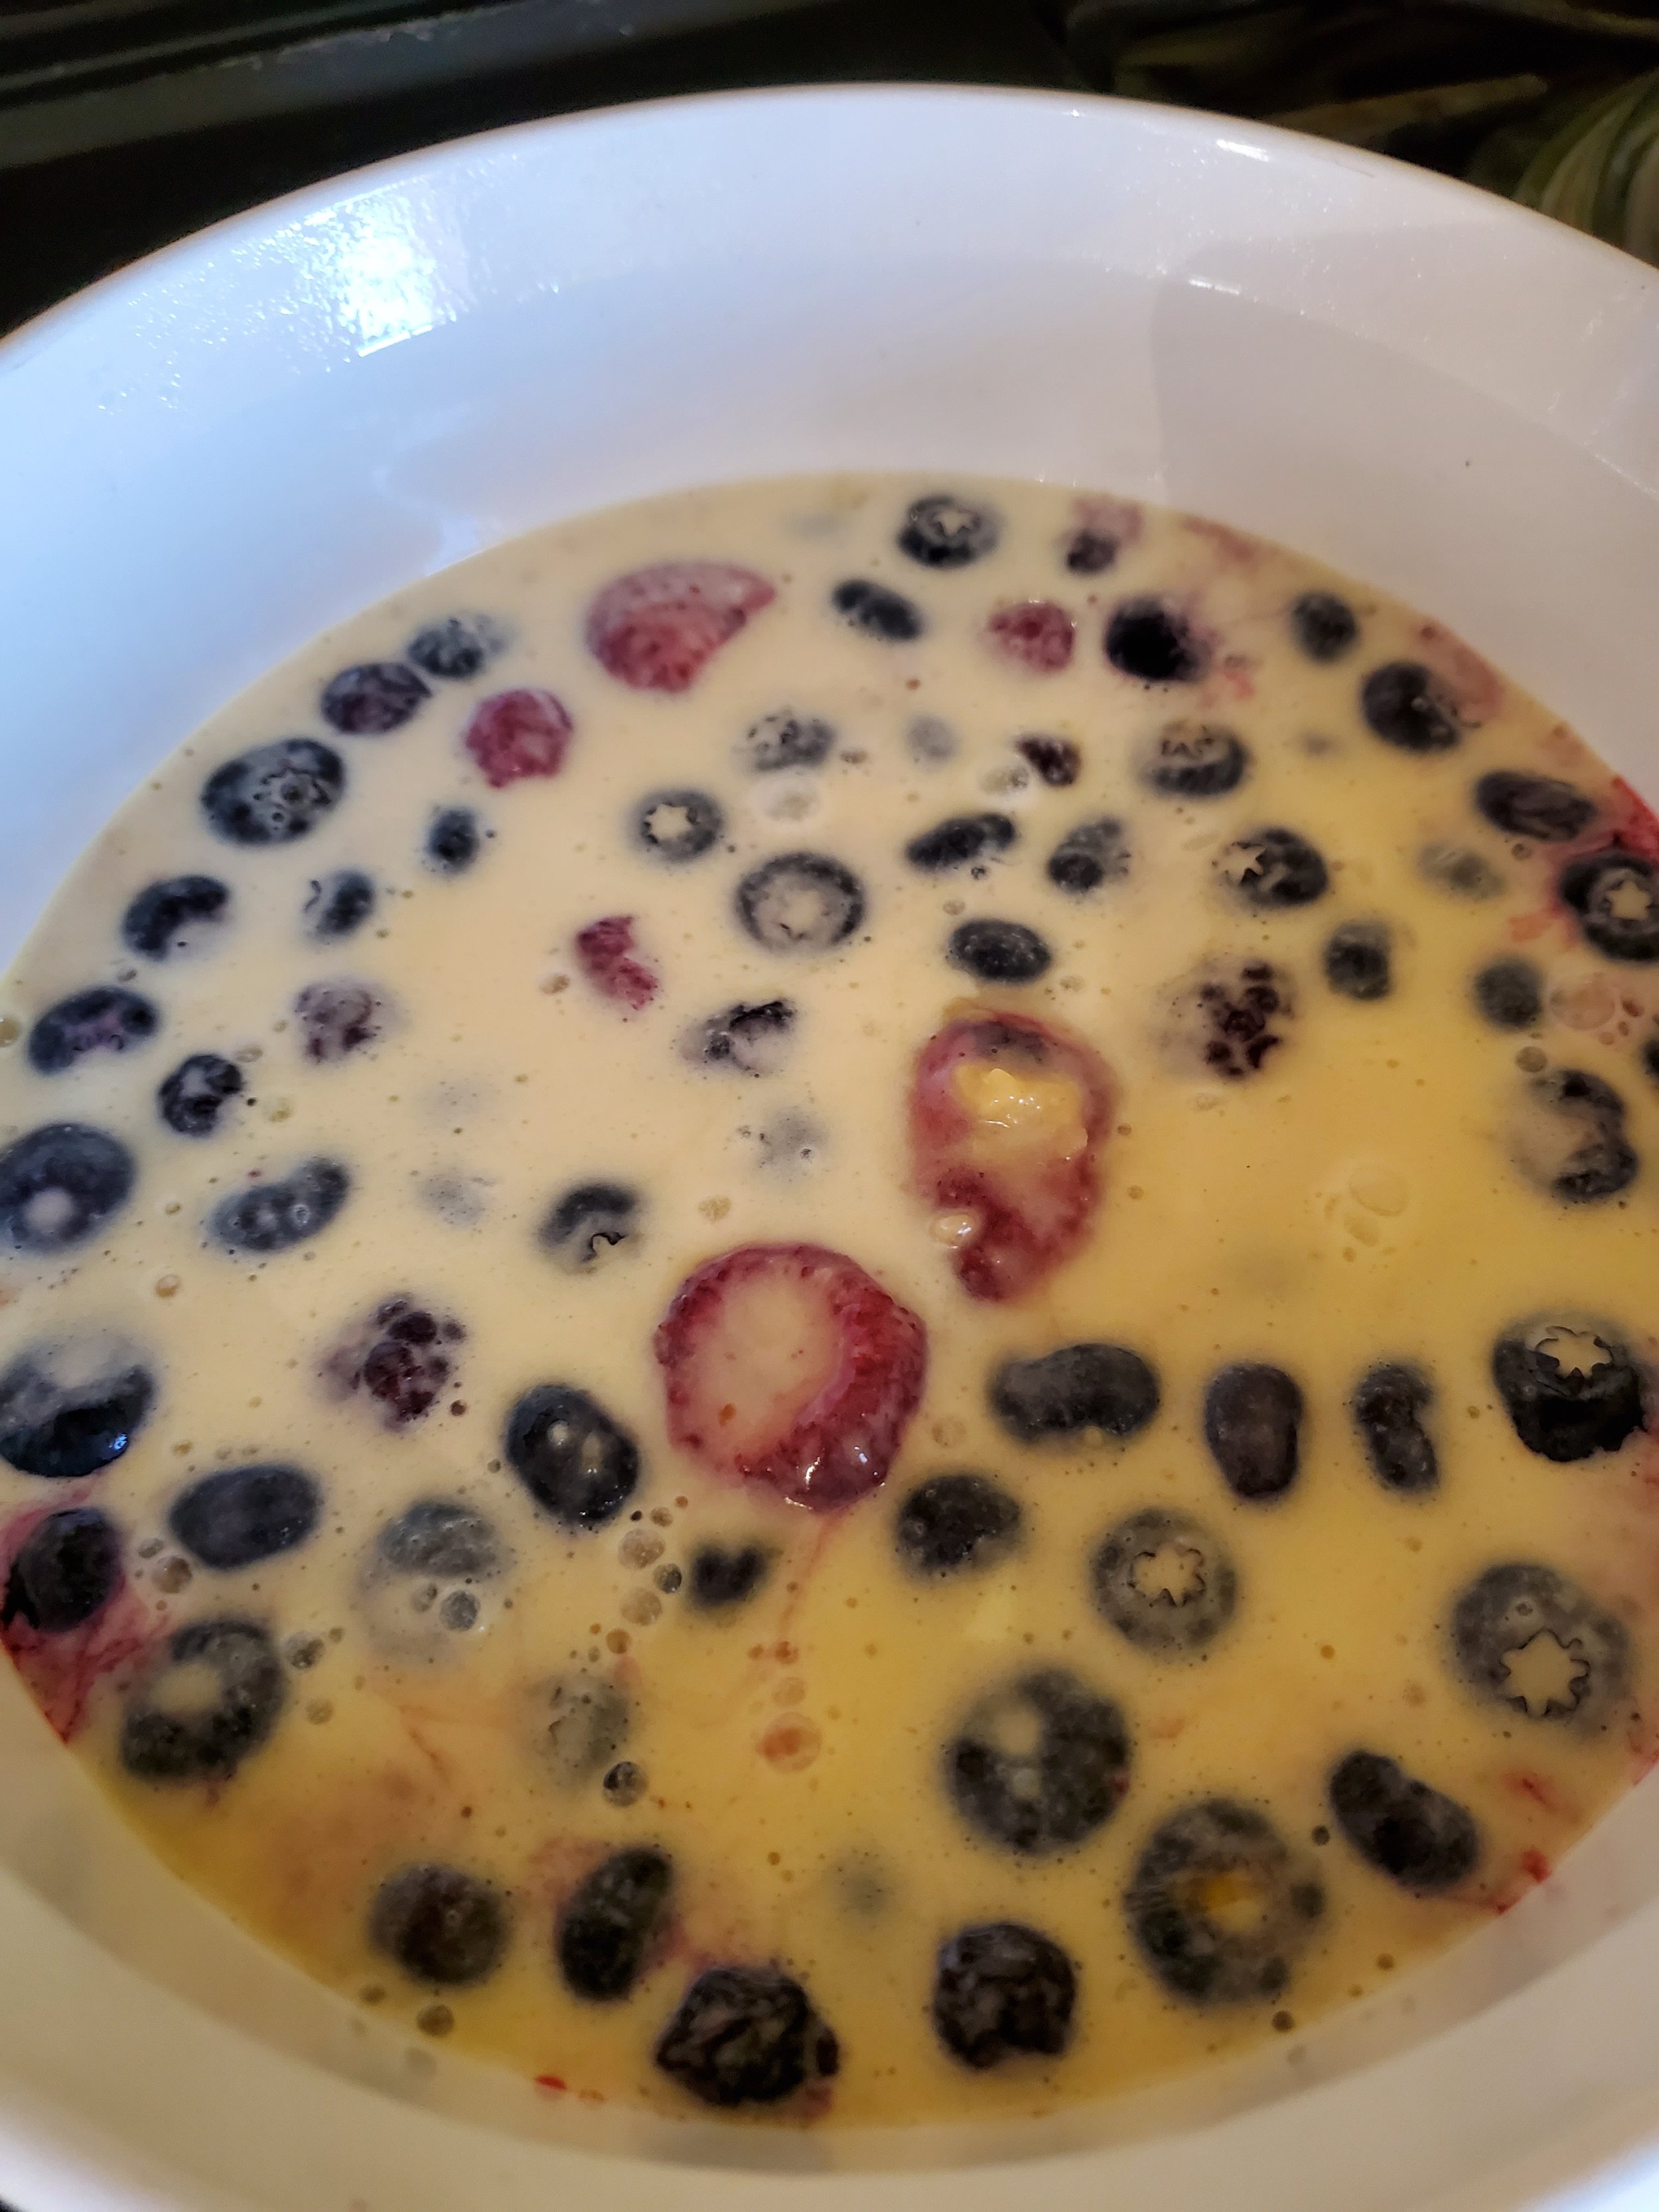 Let's add our berries to the batter...